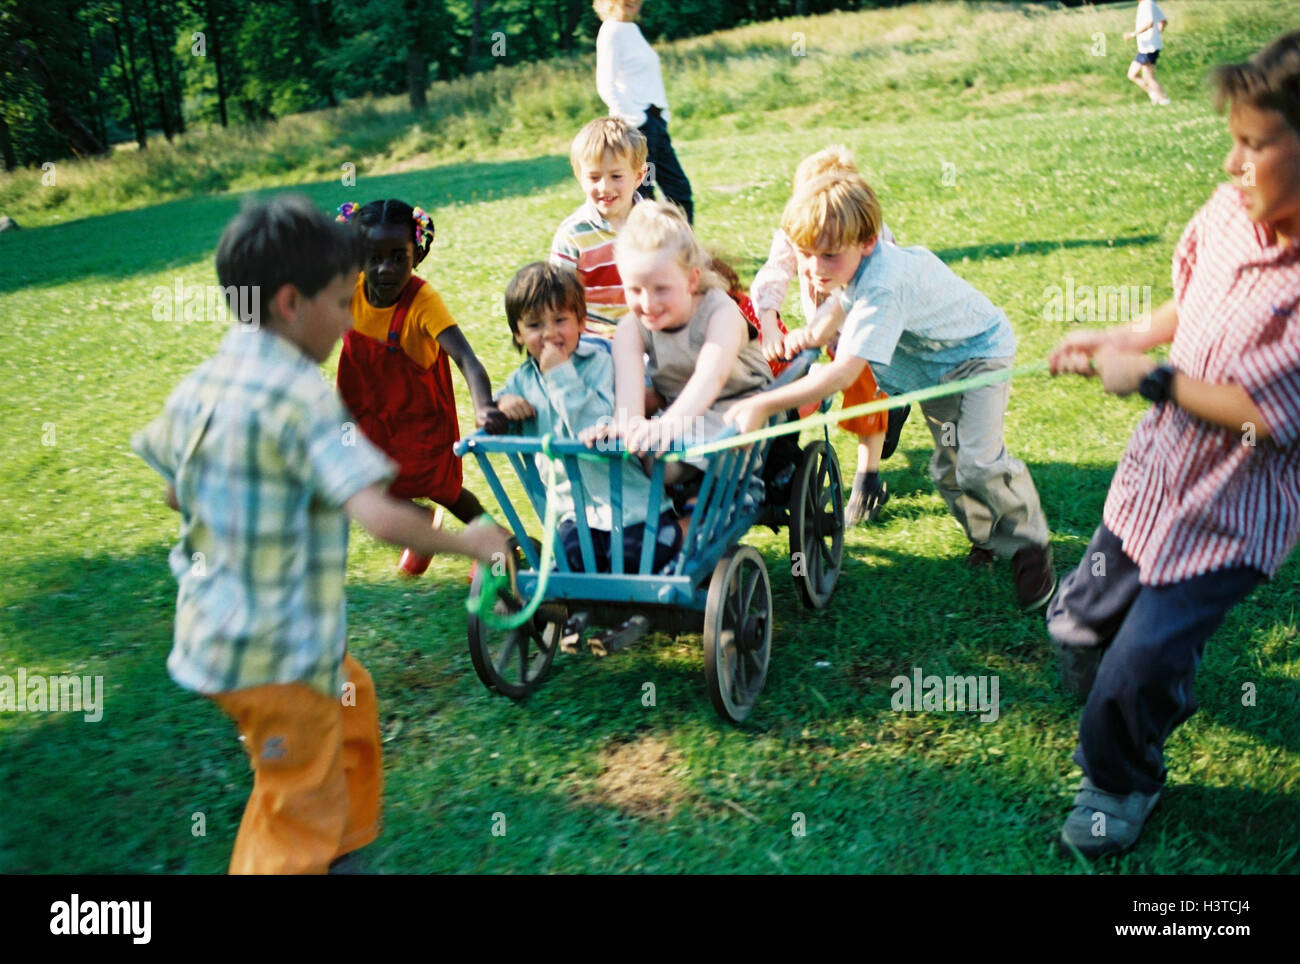 Children, group, skin colour differently, handcarts, drag, game, fun, summer, outside youth, childhood, friends, friendship, boy, girl, nationality, passed away, difference, leisure time, amusement, happy, melted, lighthearted, carriages, conductor carria Stock Photo